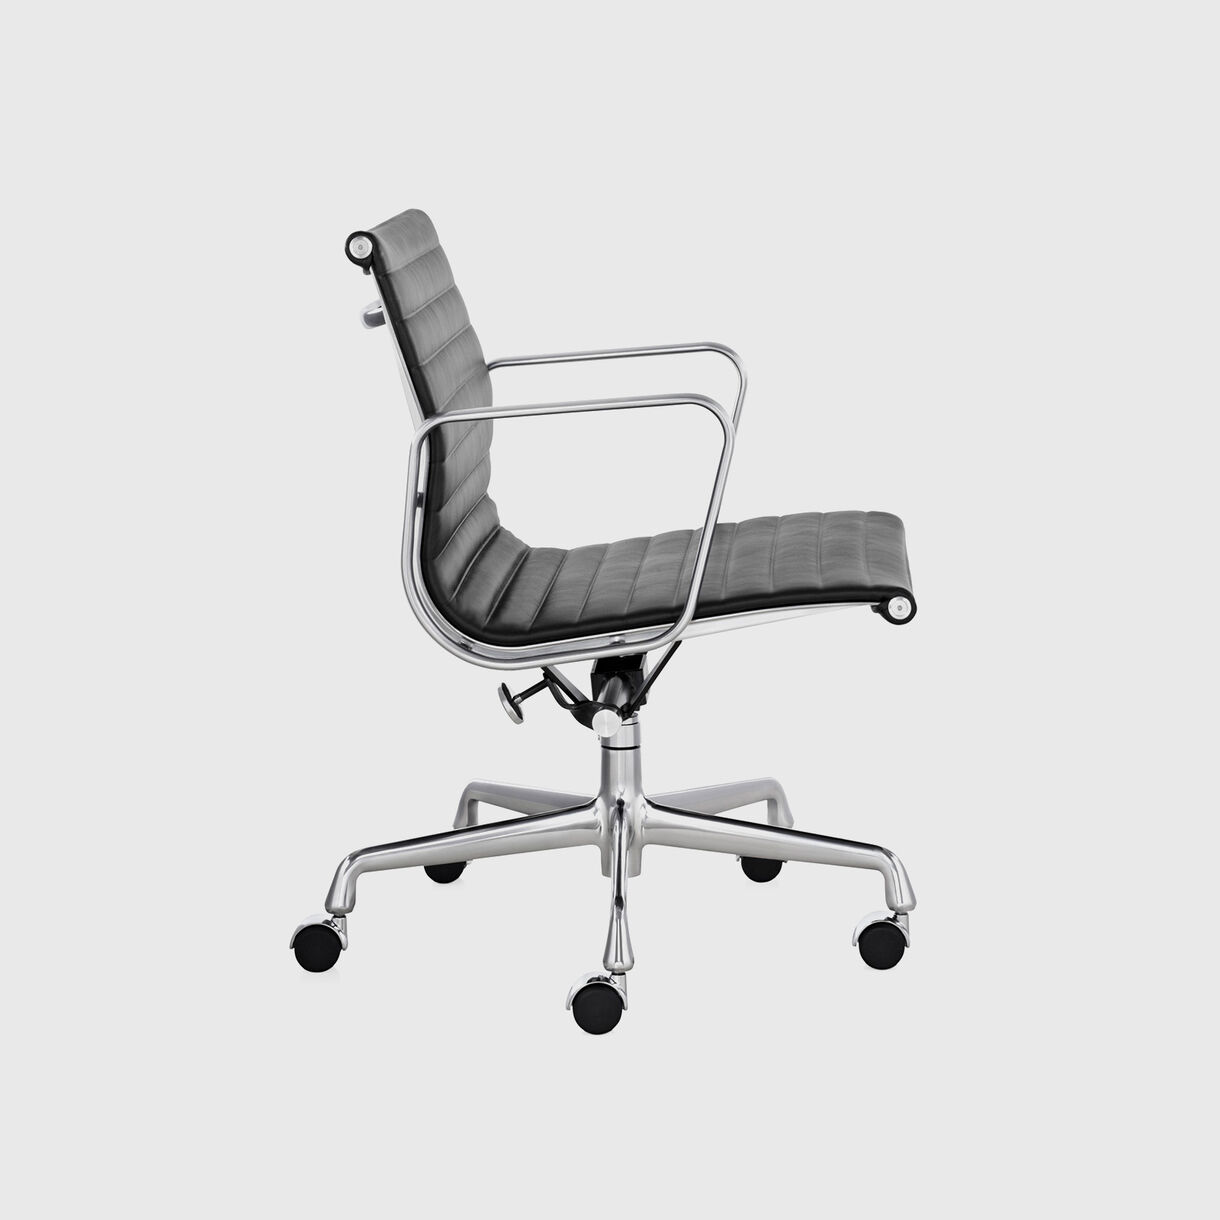 Eames Aluminum Group Management Chair, Chrome Finish with Black Leather